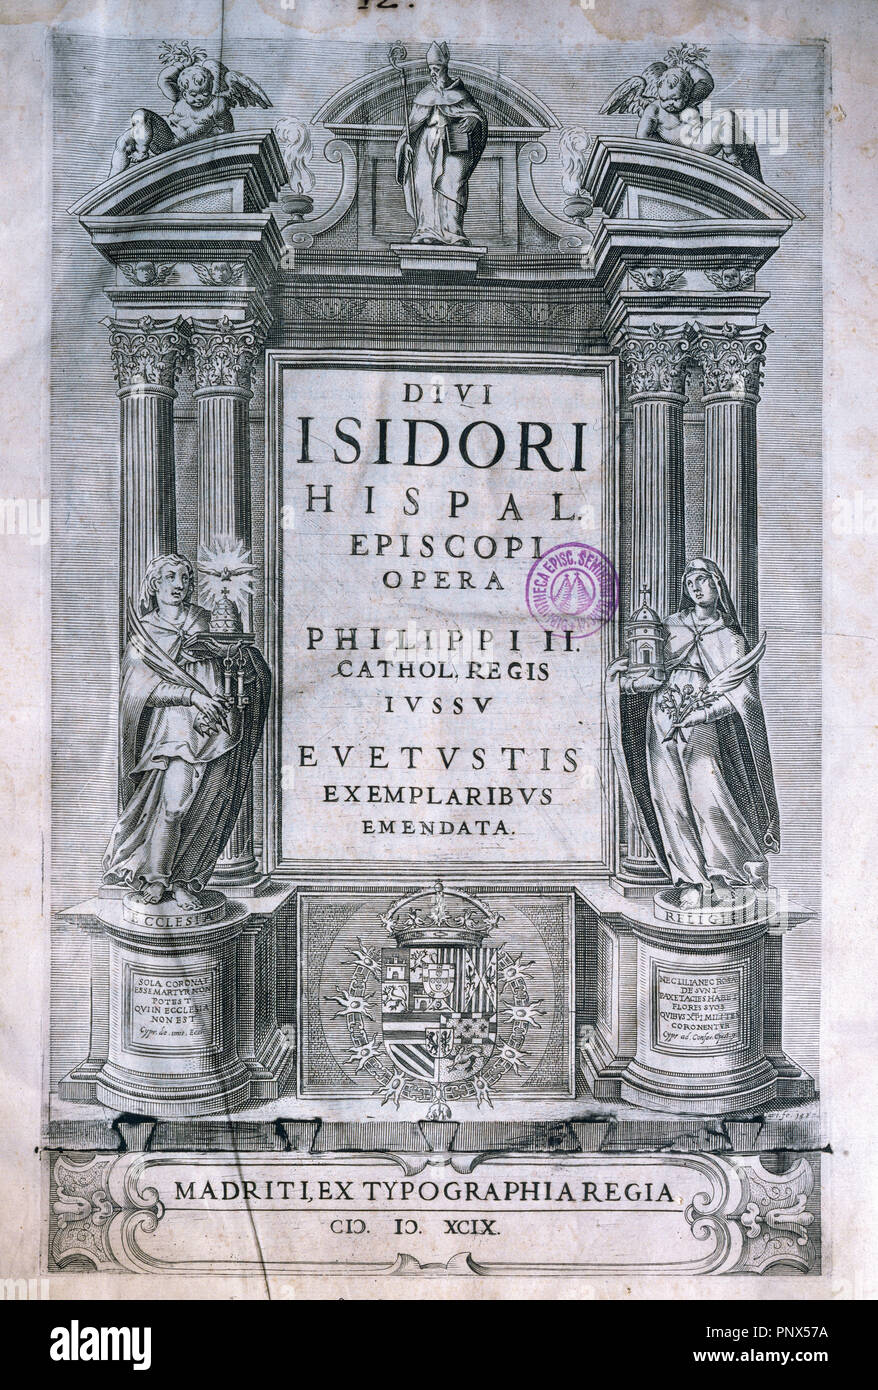 Spanish literature. 7th century. Saint Isidore of Seville  (c. 560 Ð 636) Archbishop of Seville and Doctor of the Church. 'In Qua Grammatica et Historica'. Book cover. Published in Madrid, 1599. Episcopal Library. Barcelona. Spain. Stock Photo